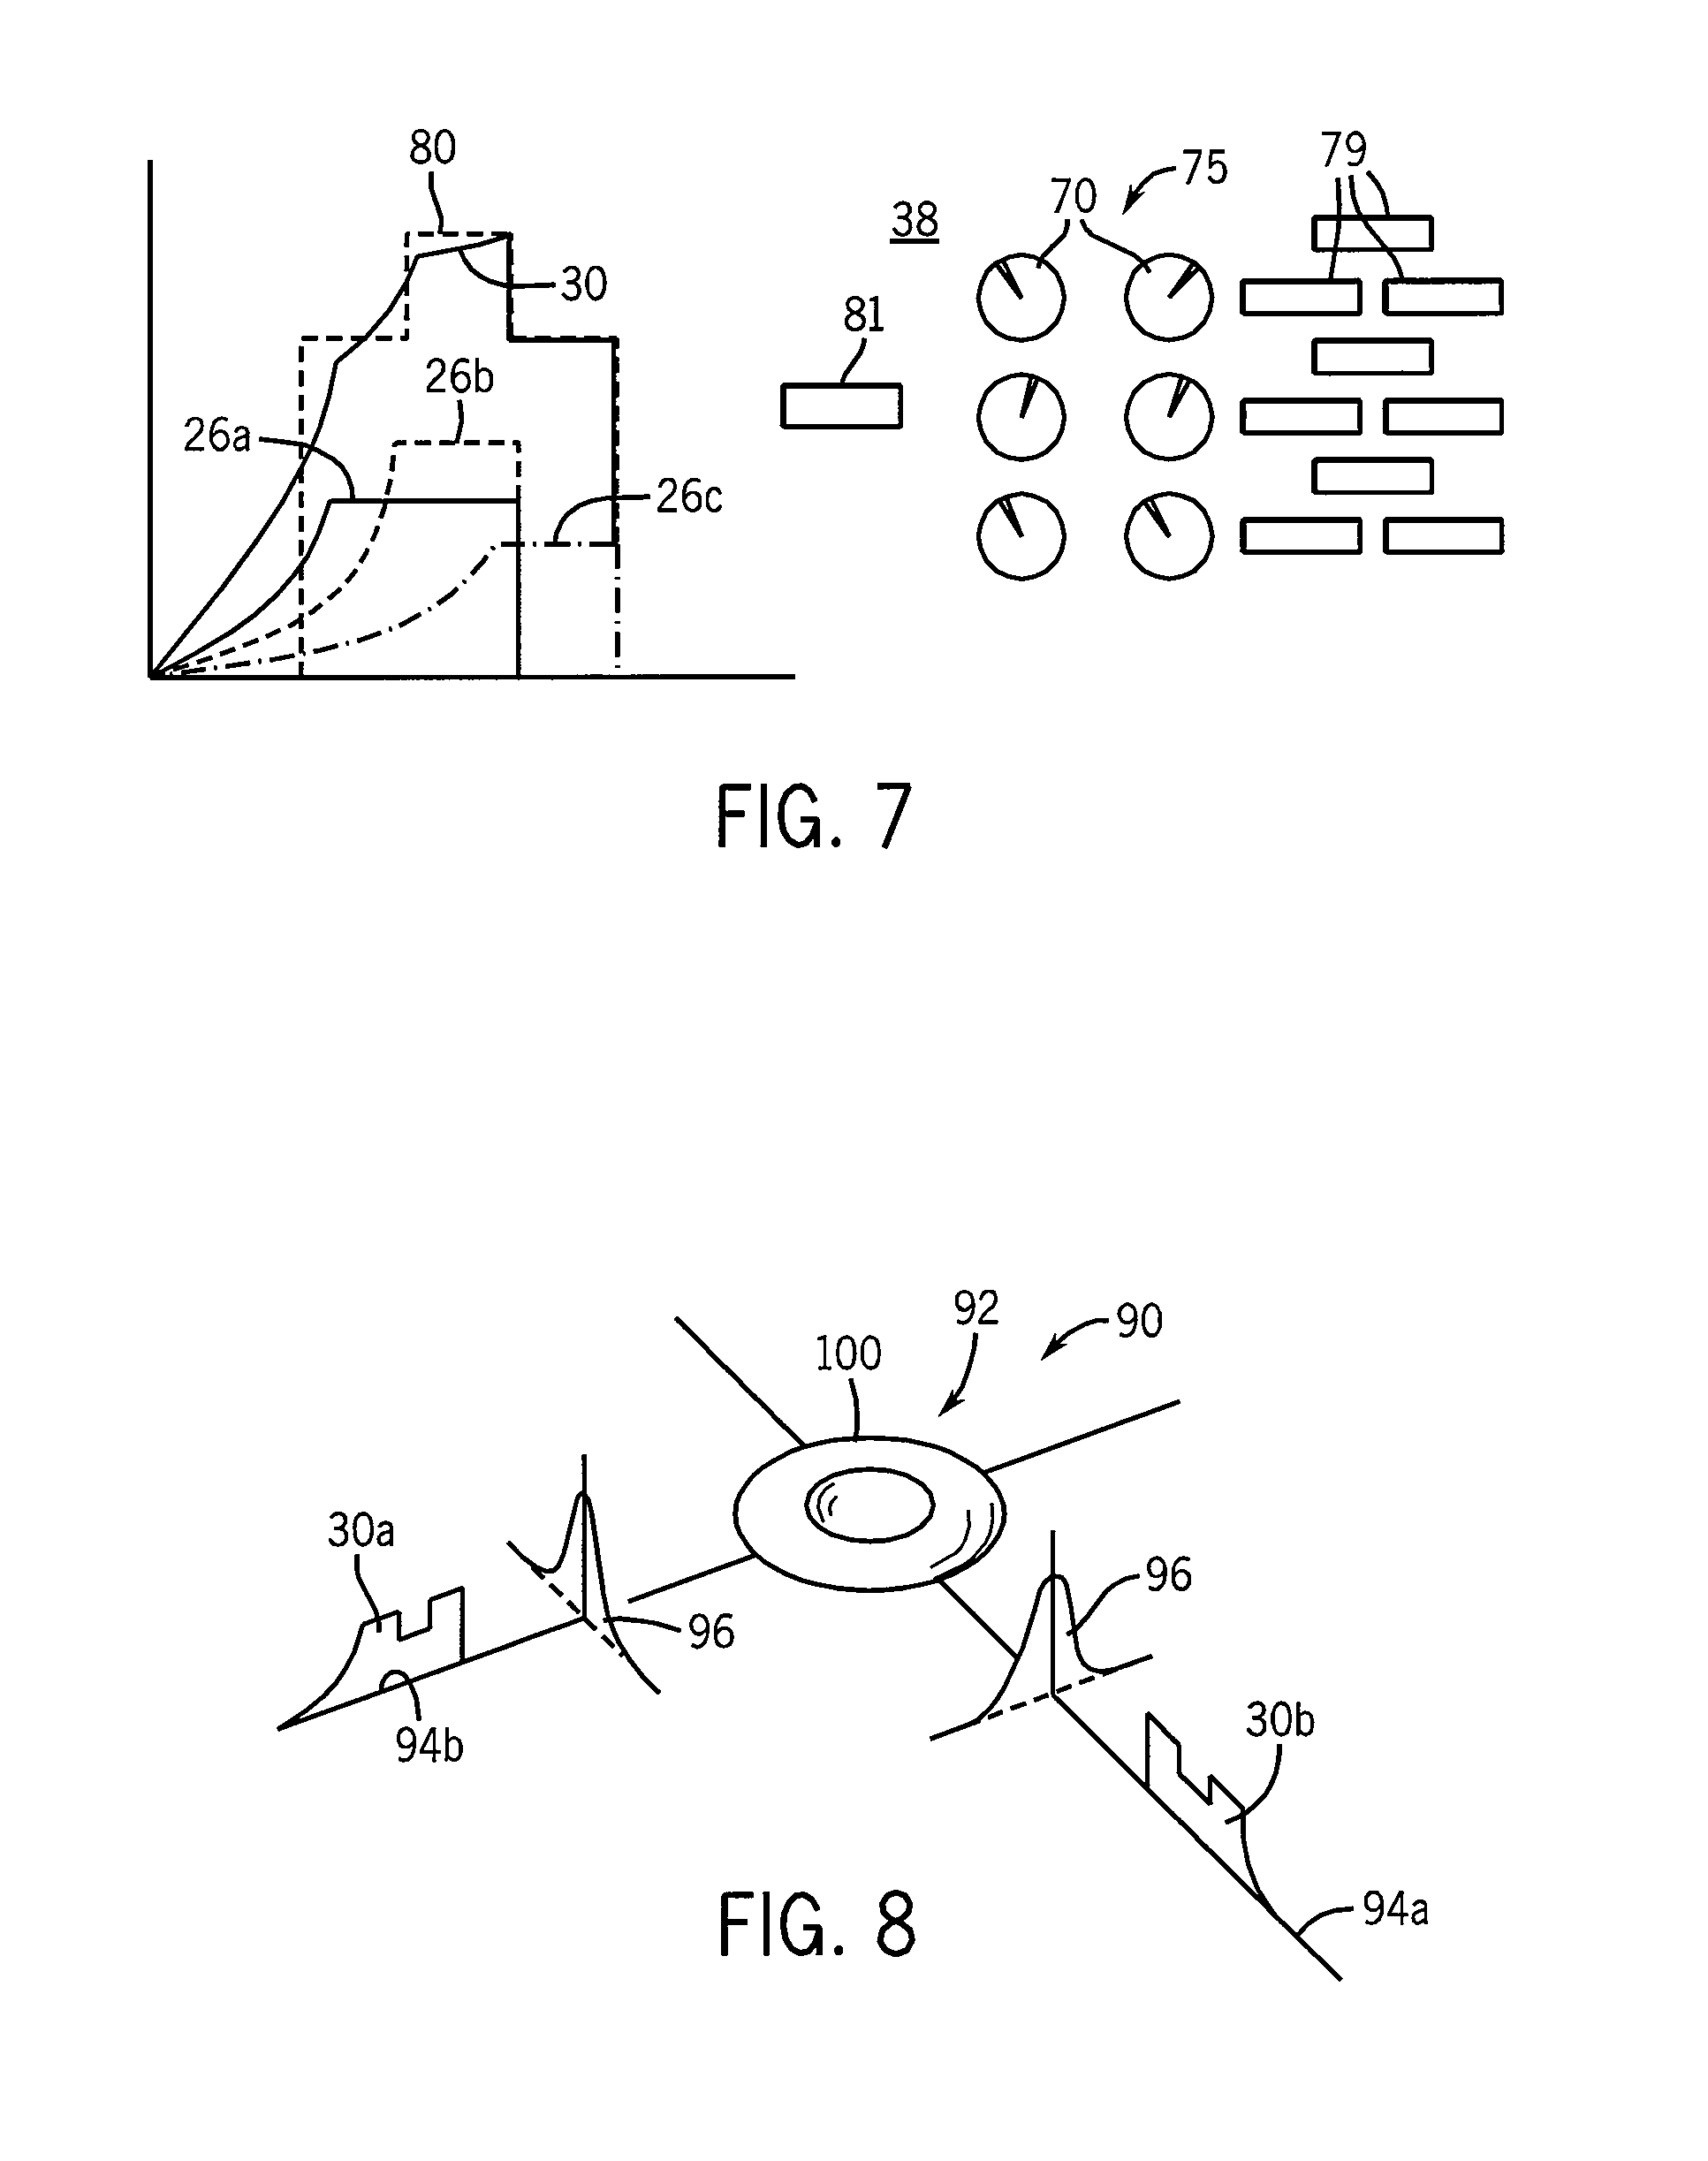 Treatment planning tool for heavy-ion therapy